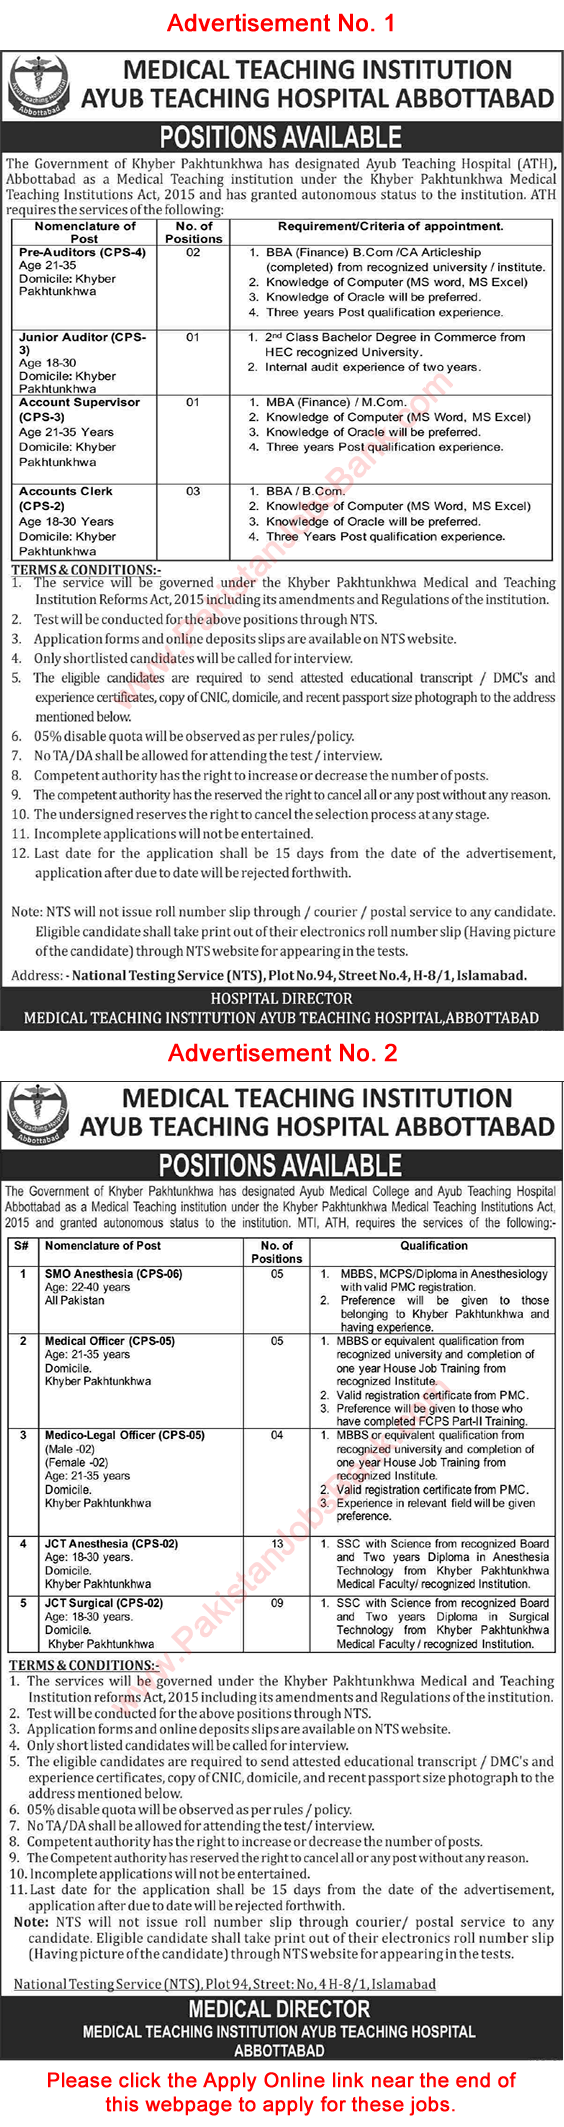 Ayub Teaching Hospital Abbottabad Jobs April 2021 NTS Apply Online MTI ATH Clinical Technicians & Others Latest